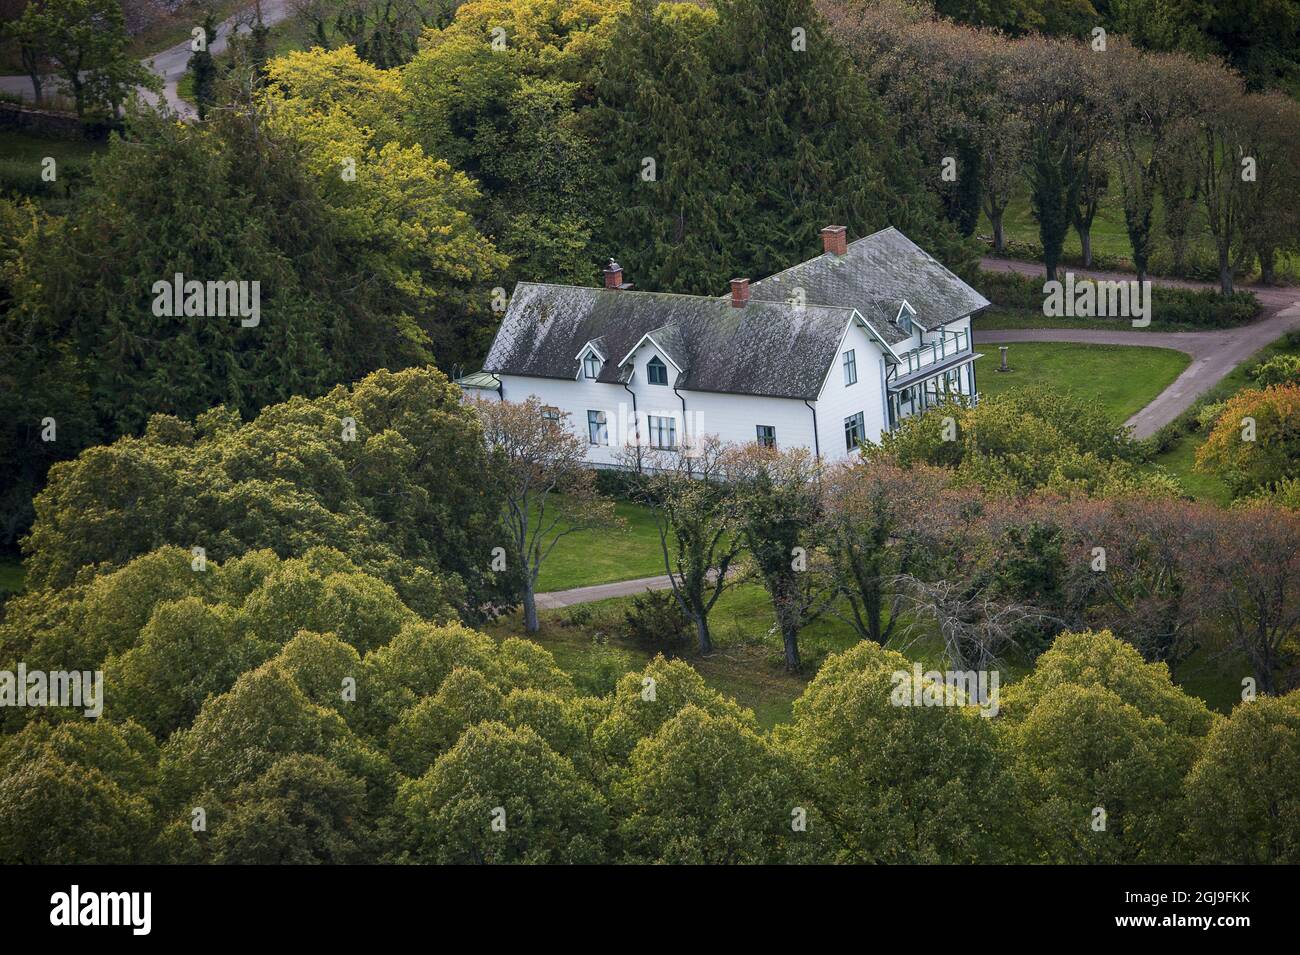 KALMAR. 2015-10-07 An aerial view of the 'Kavaljershuset' (The Cavallier House) near the Solliden Palace in Oland, Sweden, October 7, 2015. Foto:Suvad Mrkonjic / TT / kod 11408  Stock Photo